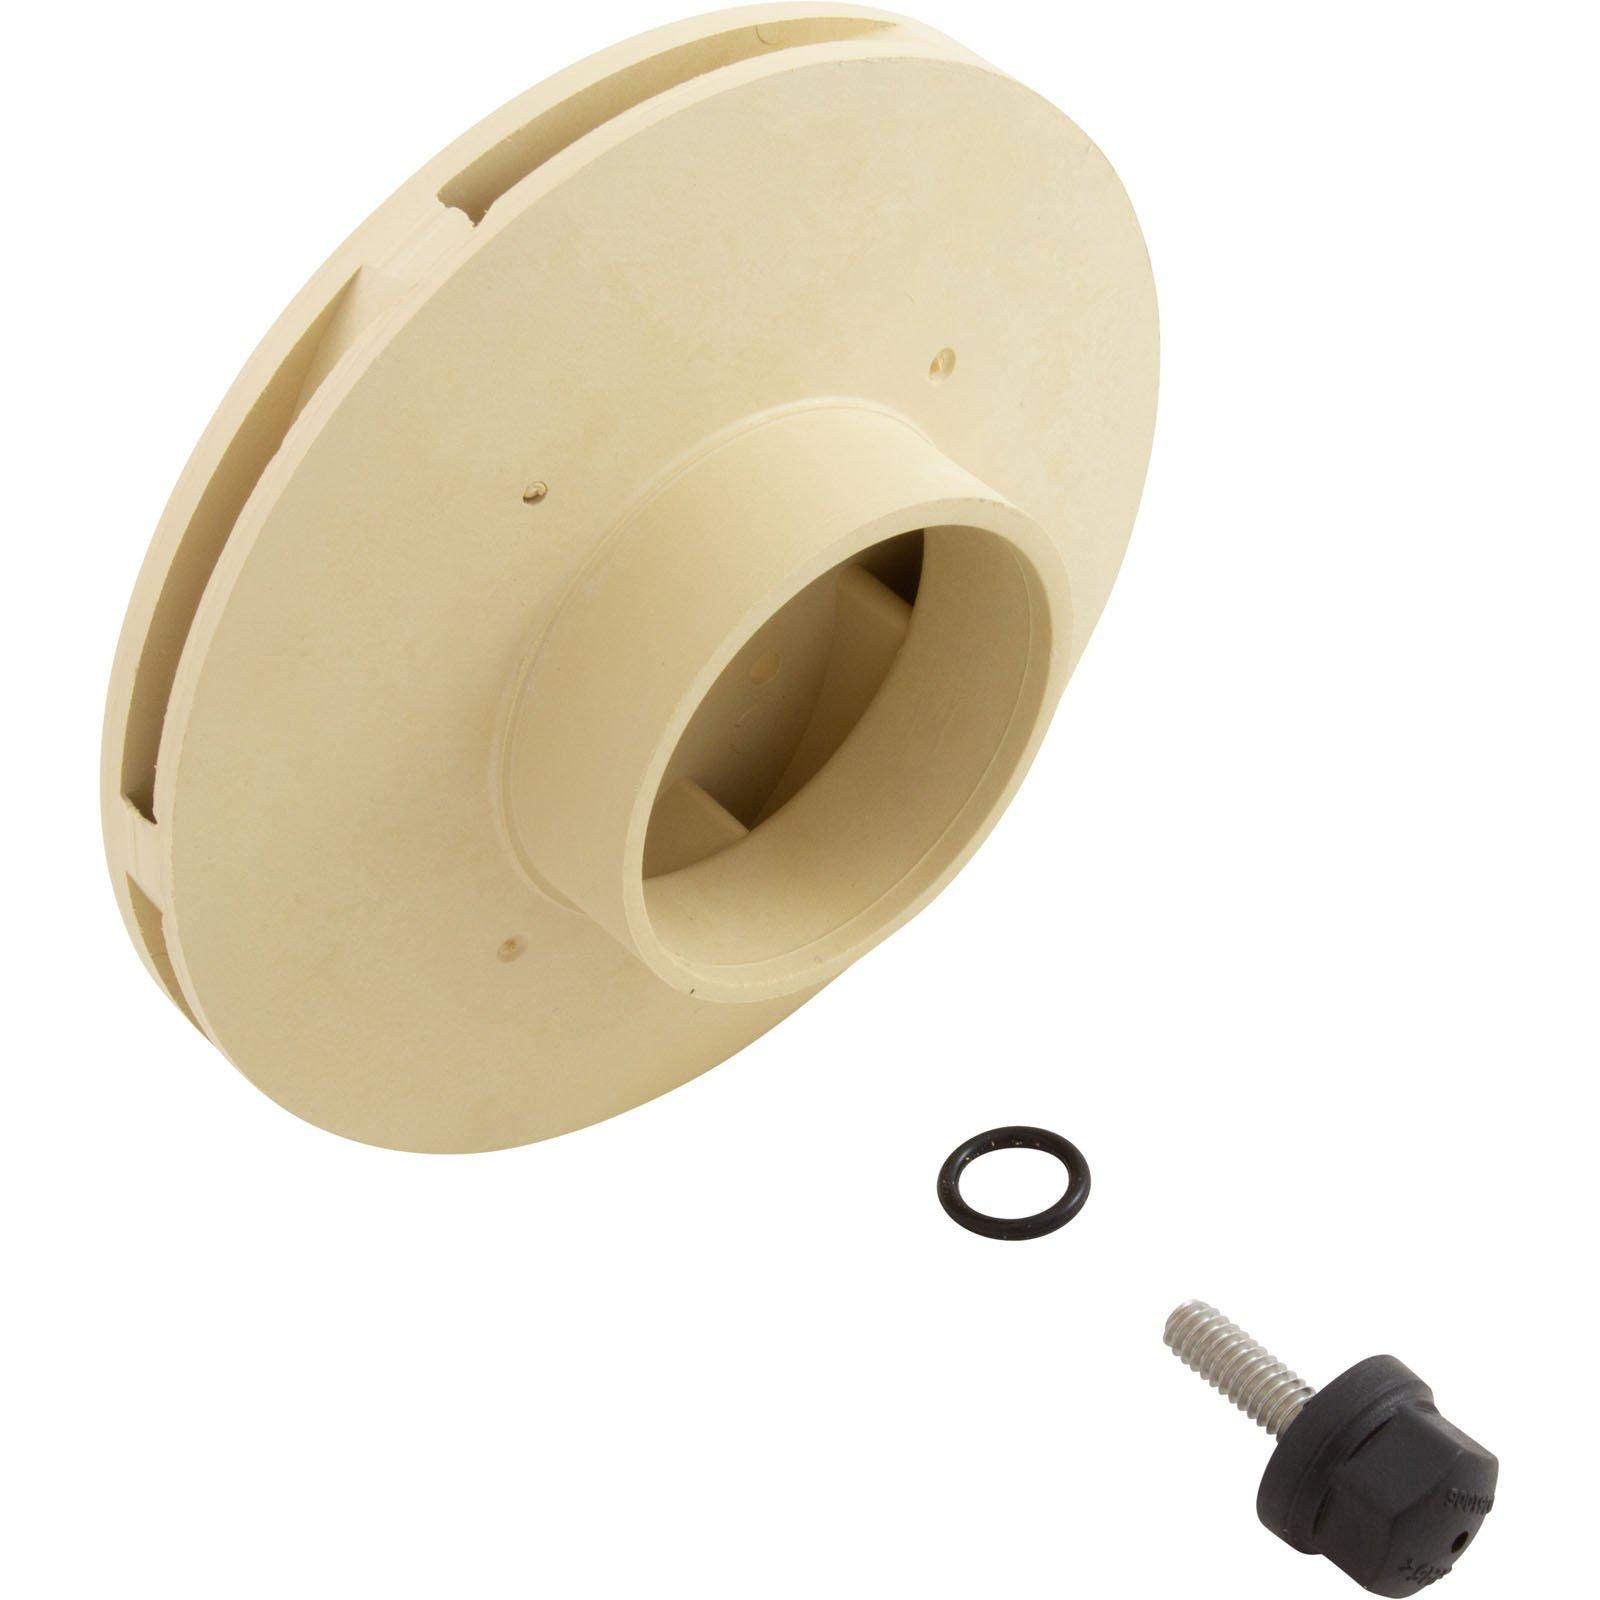 Raypak - Protege Impeller with Screw Kit for RPVSP1 Variable Speed Pool Pump